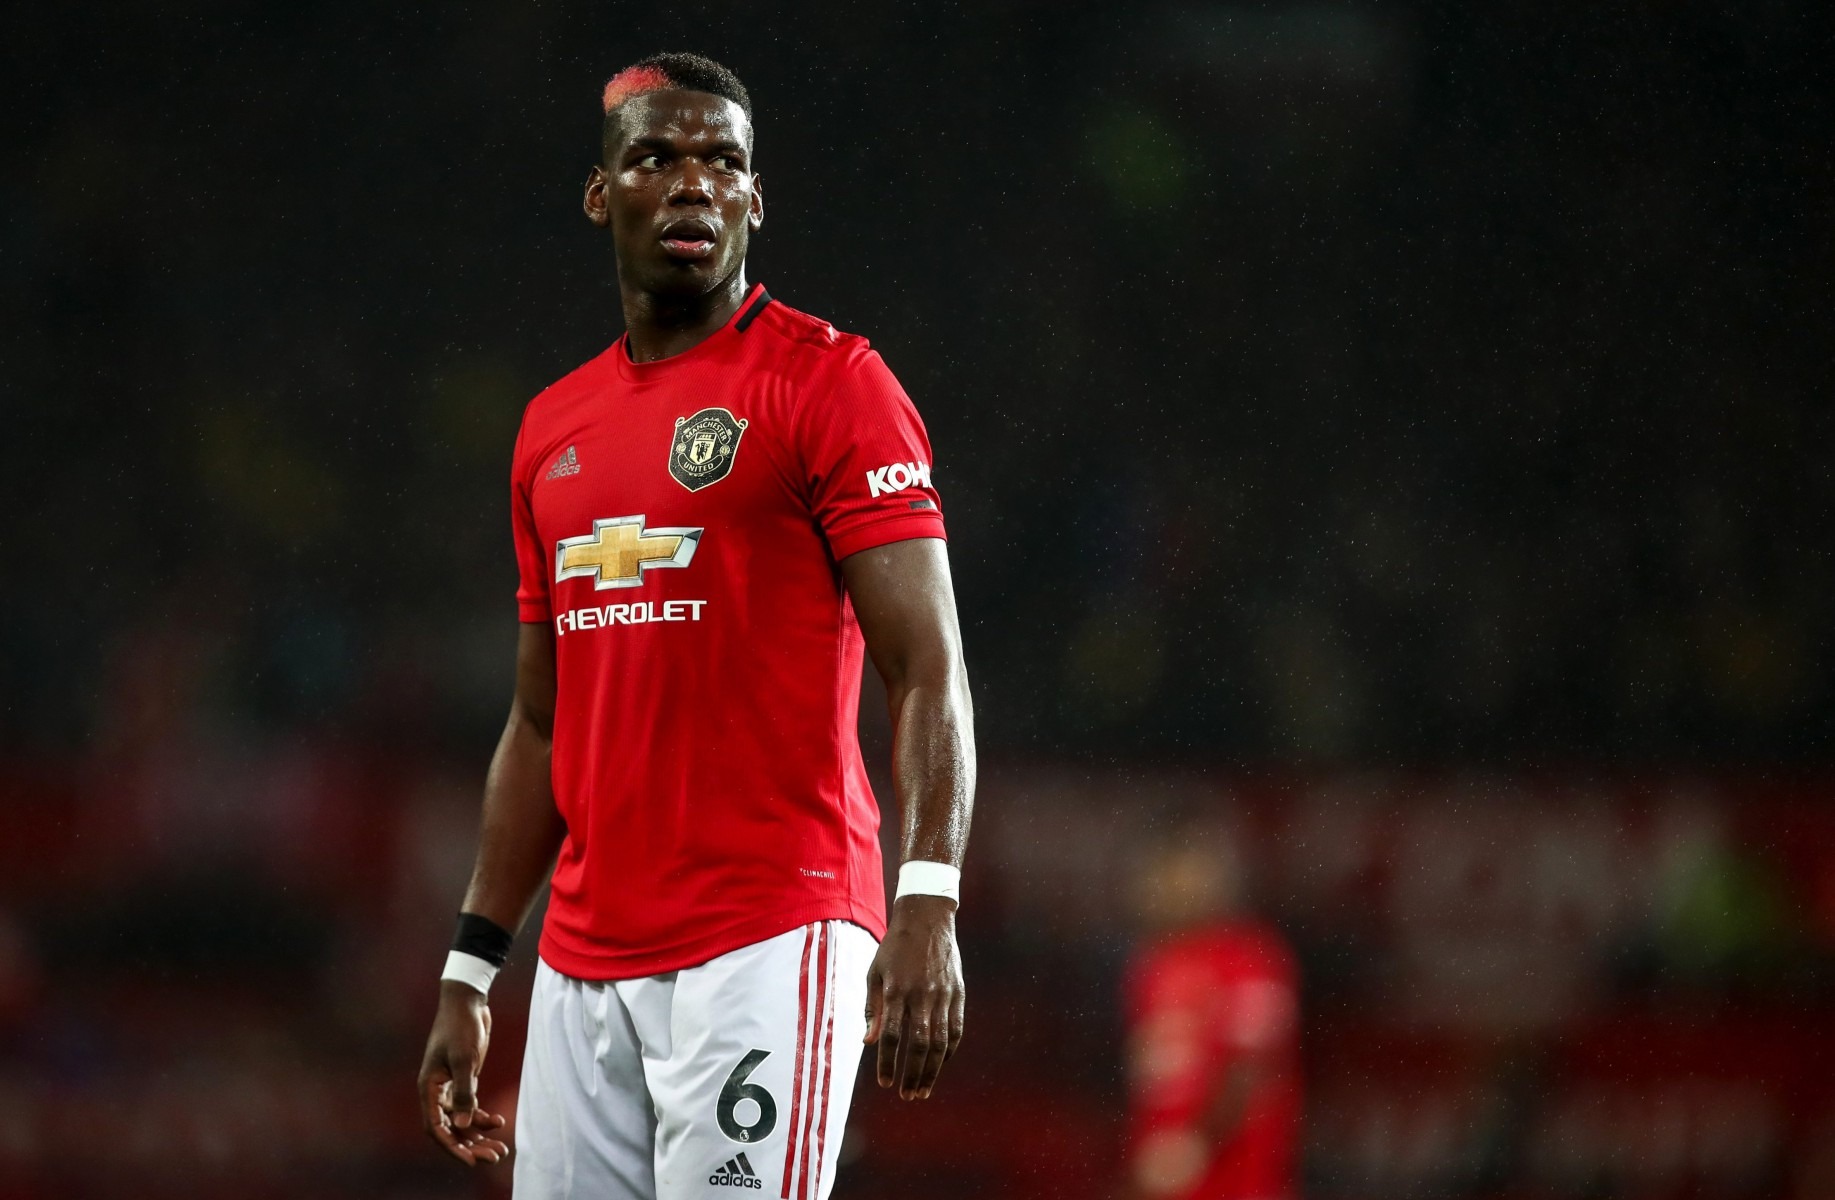 , Man Utd have to keep hold of best player Pogba, says former manager David Moyes